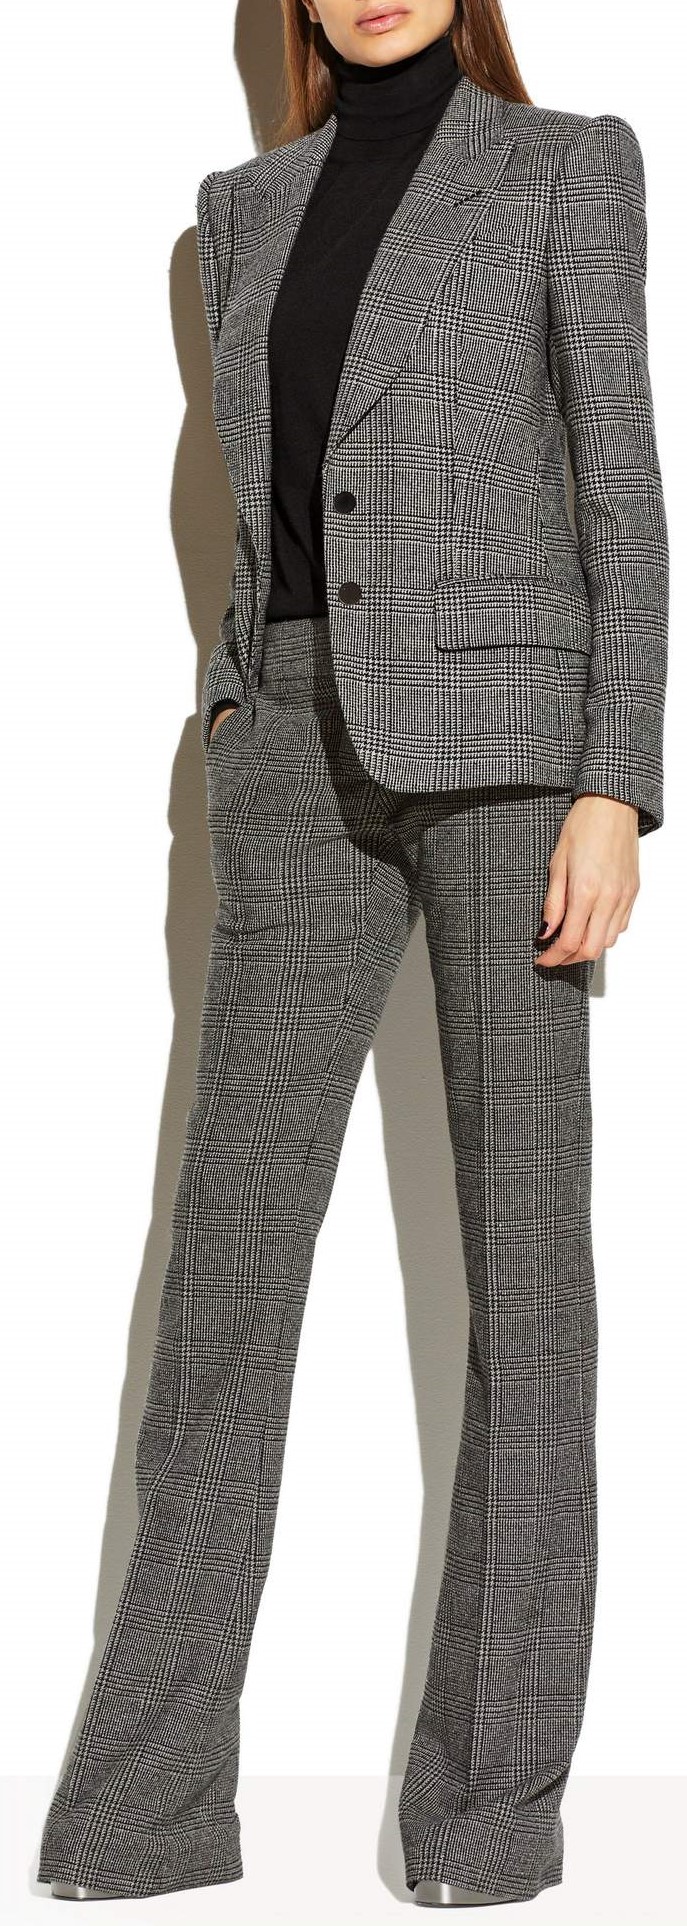 Tom Ford Prince of Wales Jacket and Pants